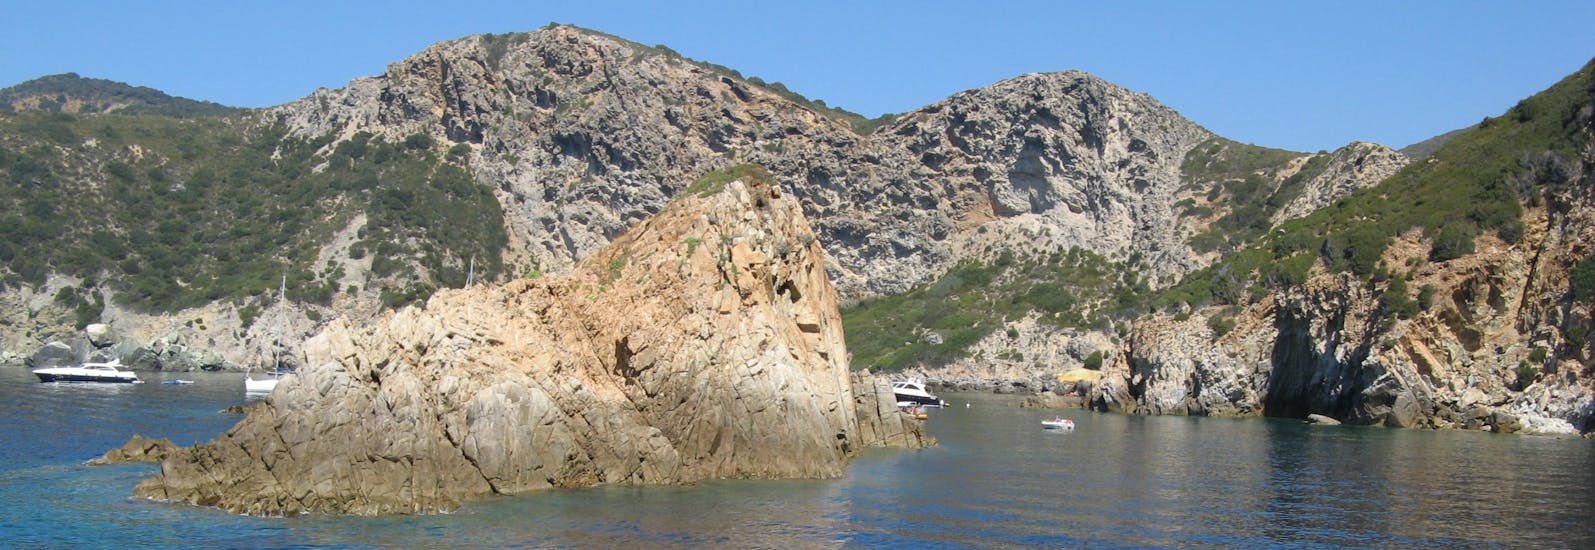 View of the coastline during our Boat trip to Giglio Island with Swimming with Toscana Mini Crociere.